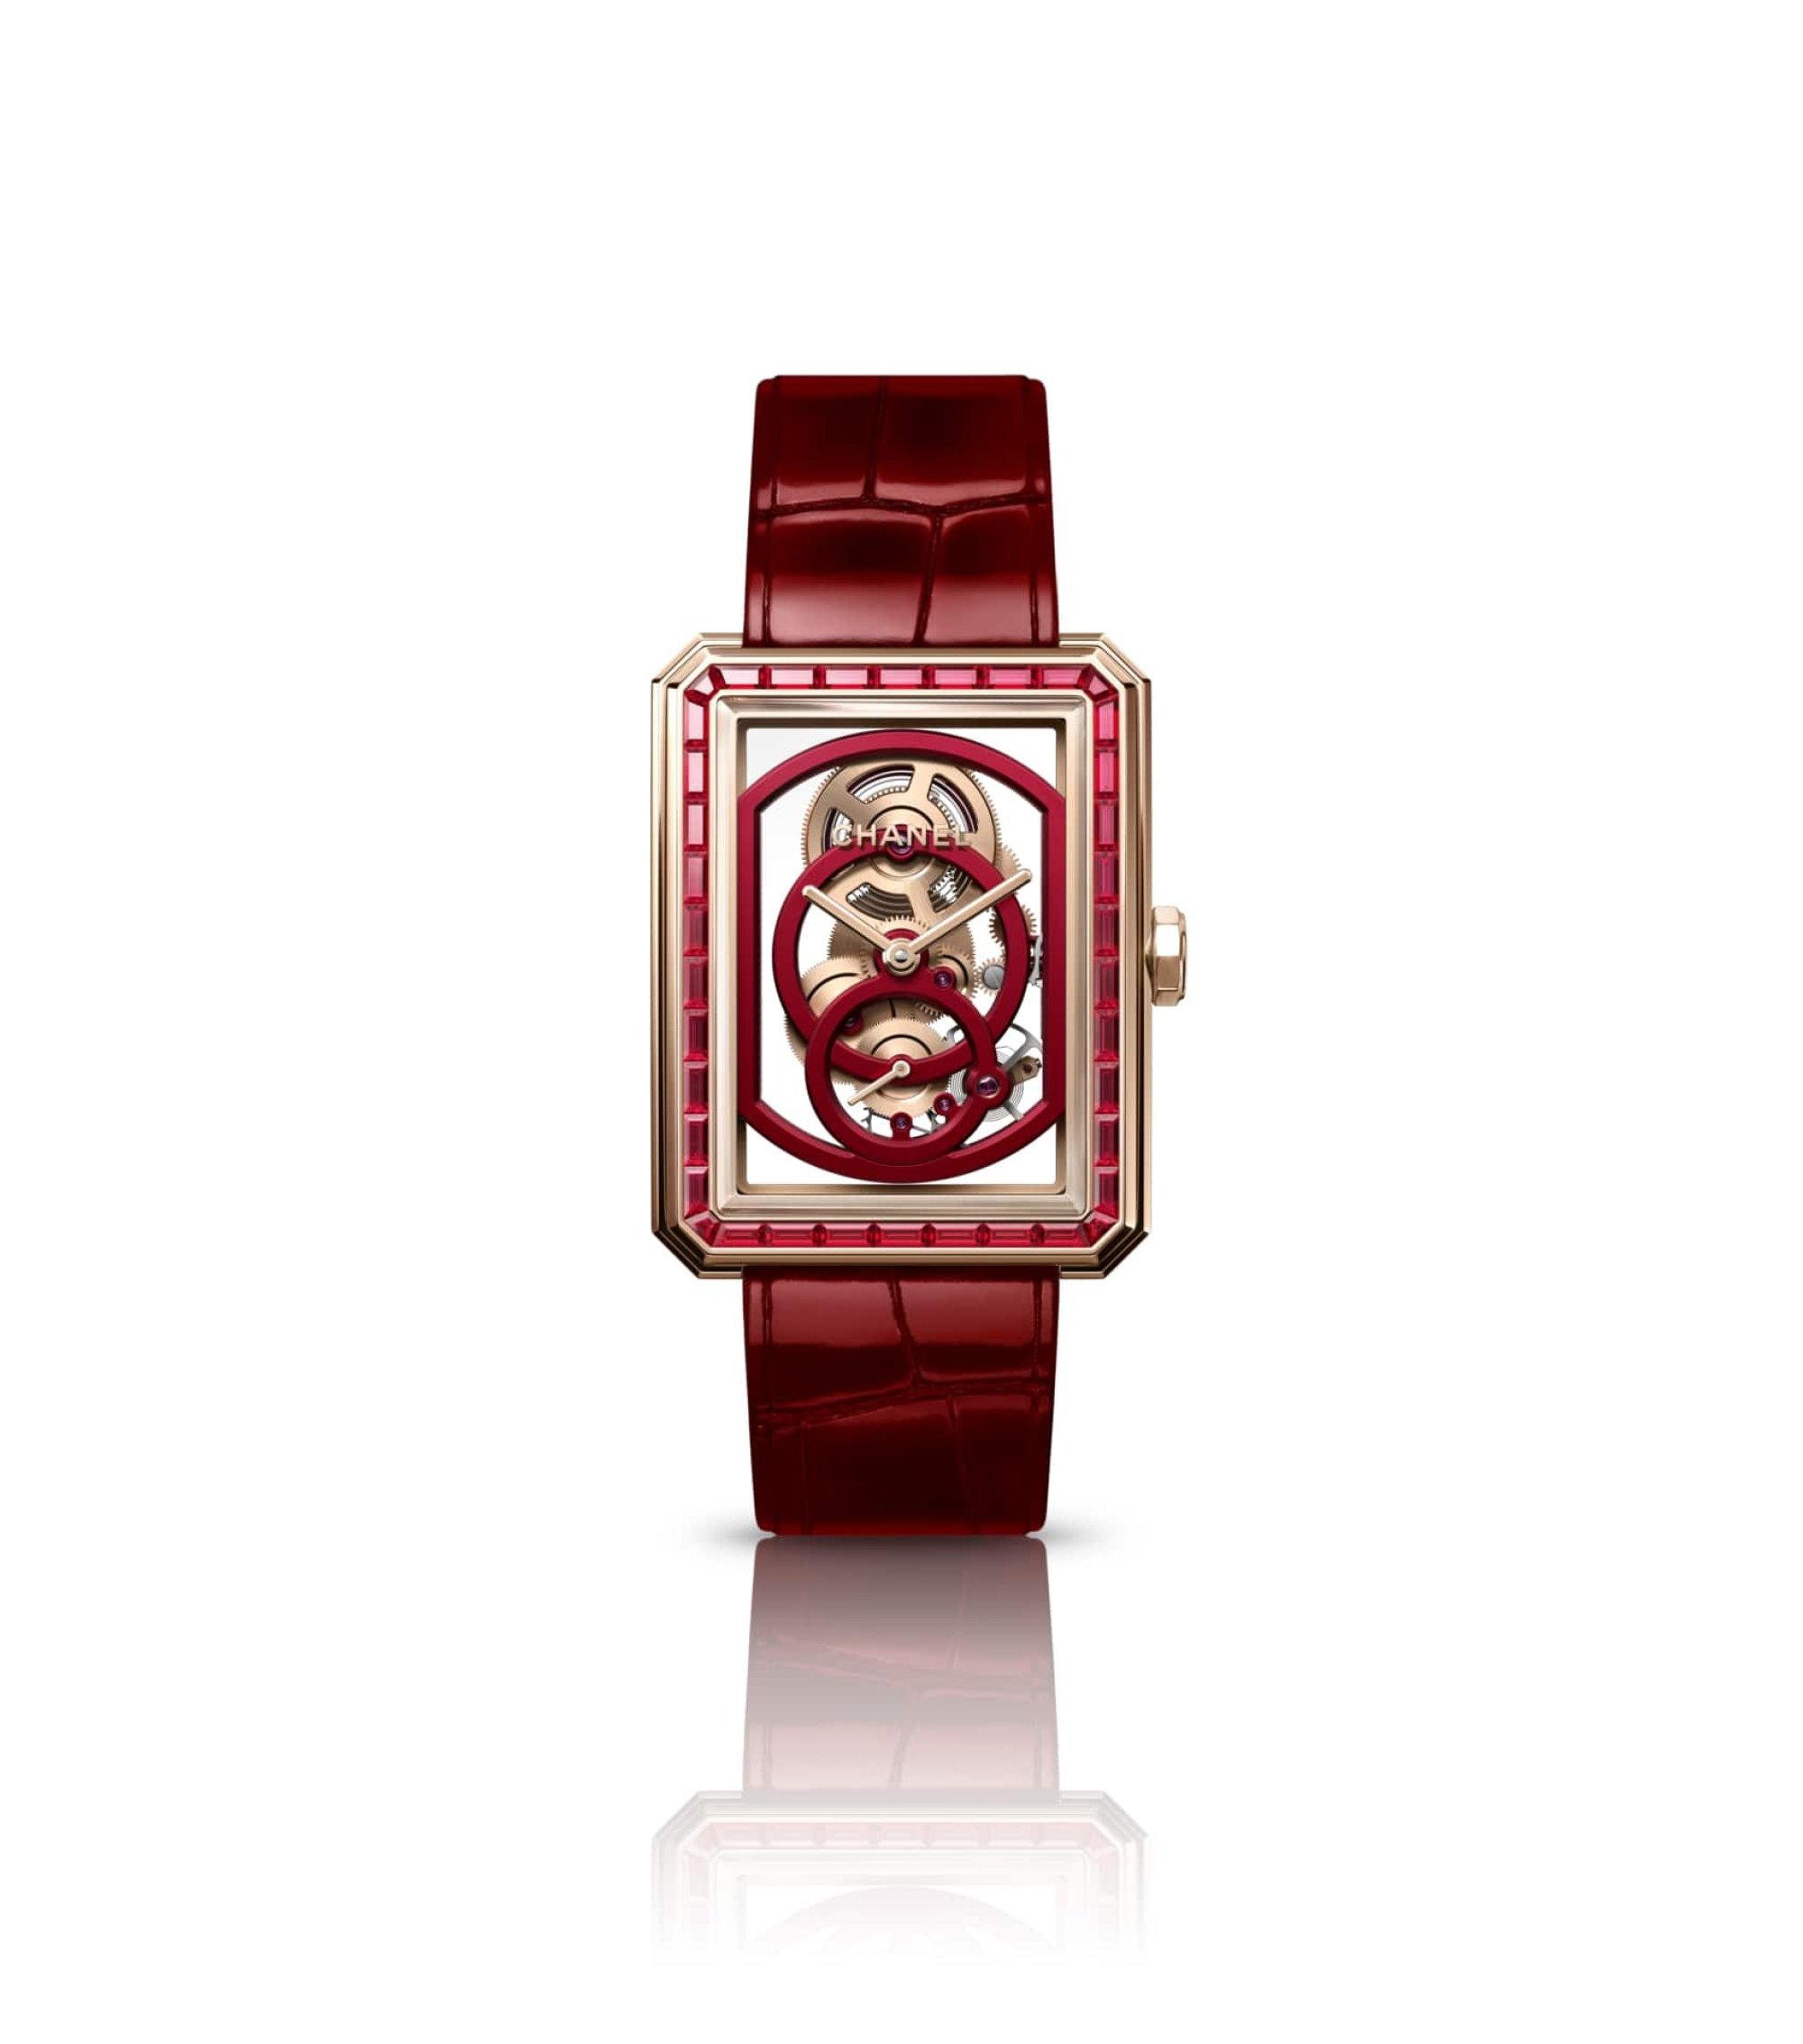 Chanel reimagined – Glass visits the renovated Chanel Watch and